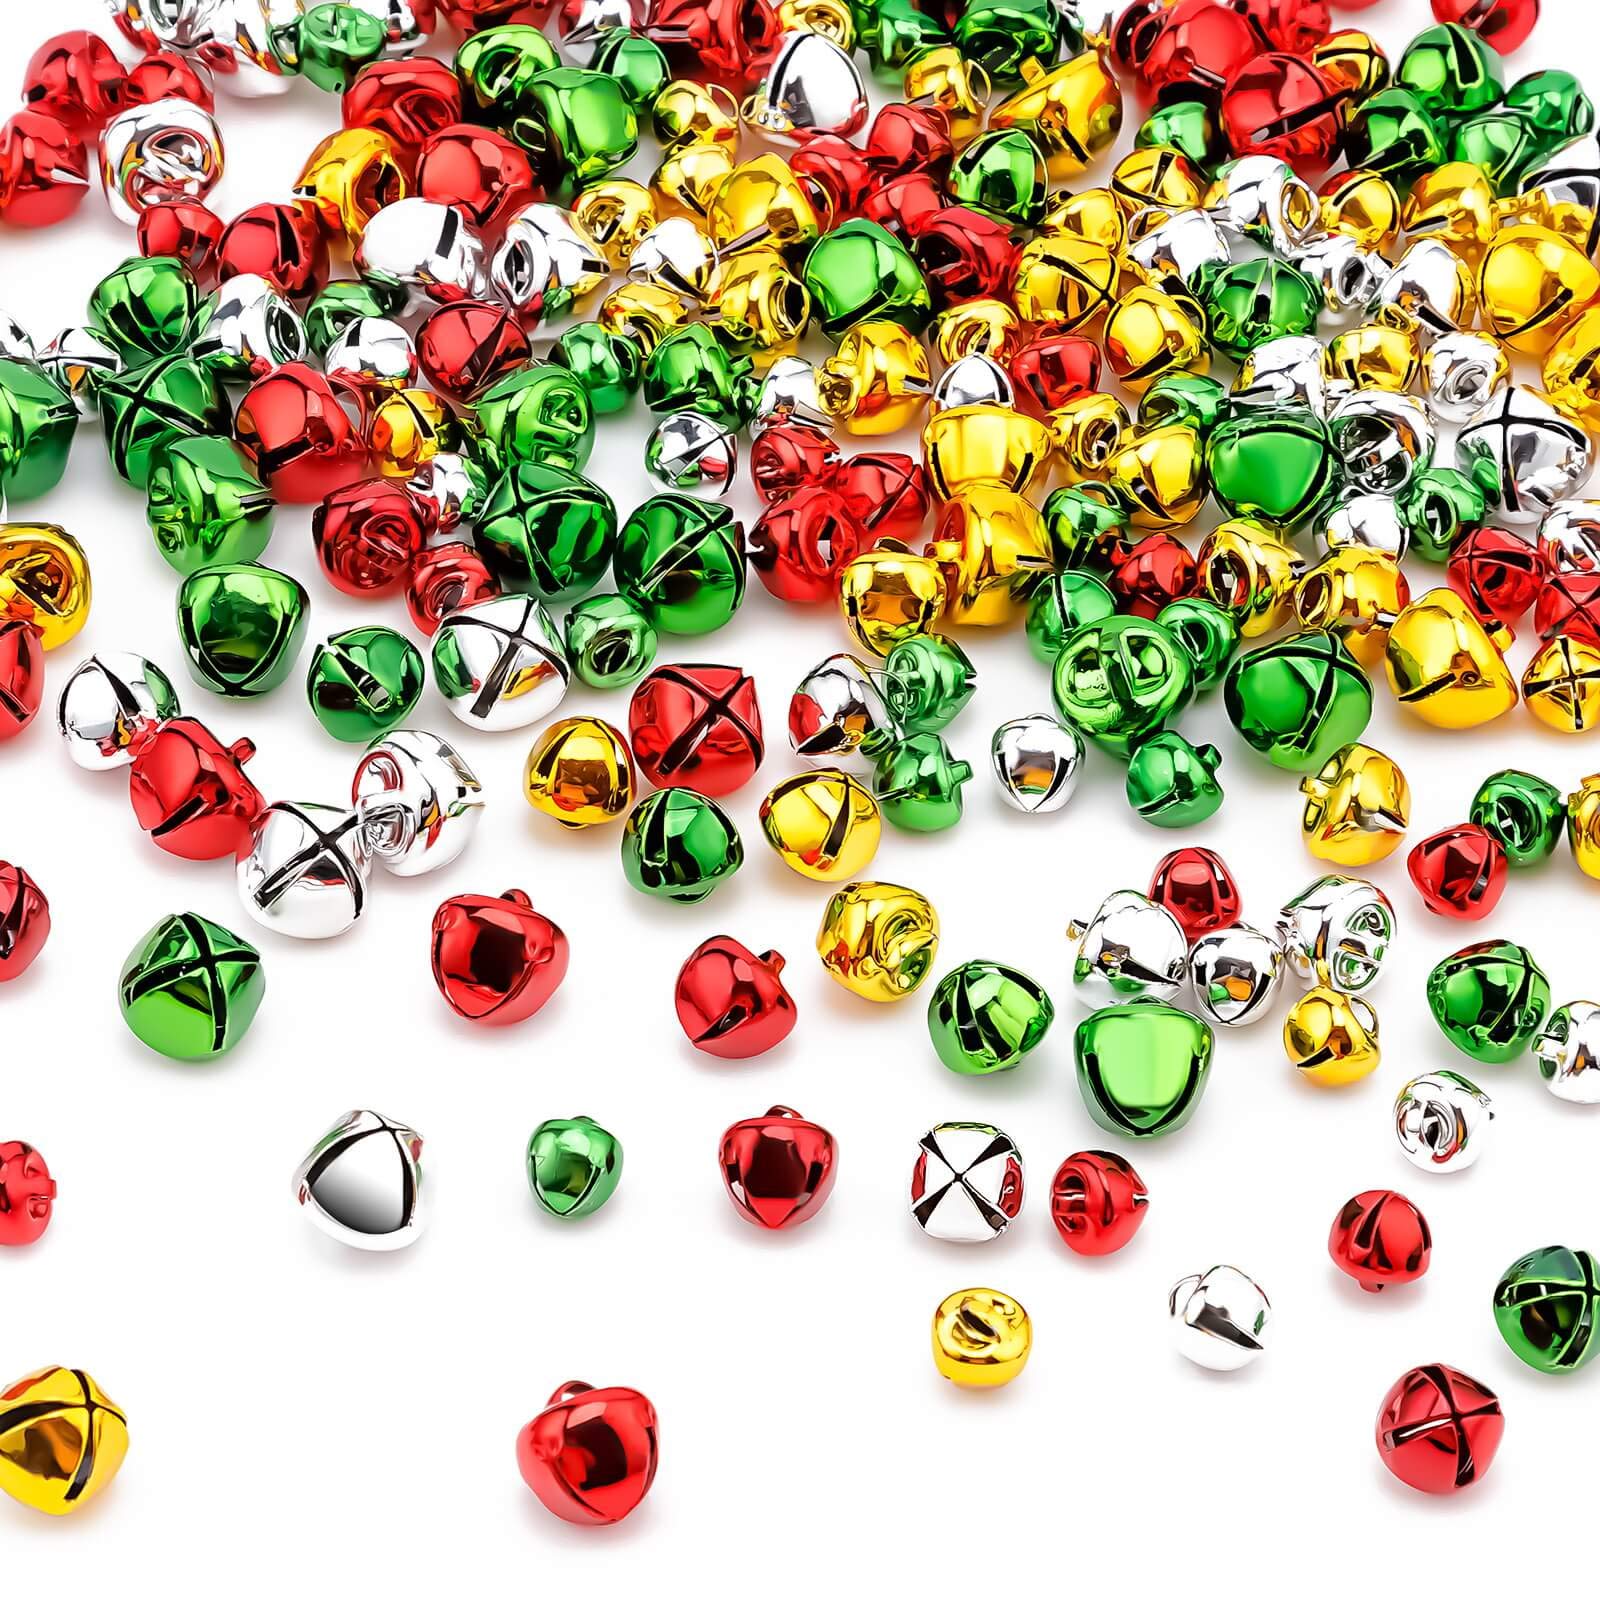 Jingle Bells, 200 Pieces Colorful Jingle Bells for Crafts, 4